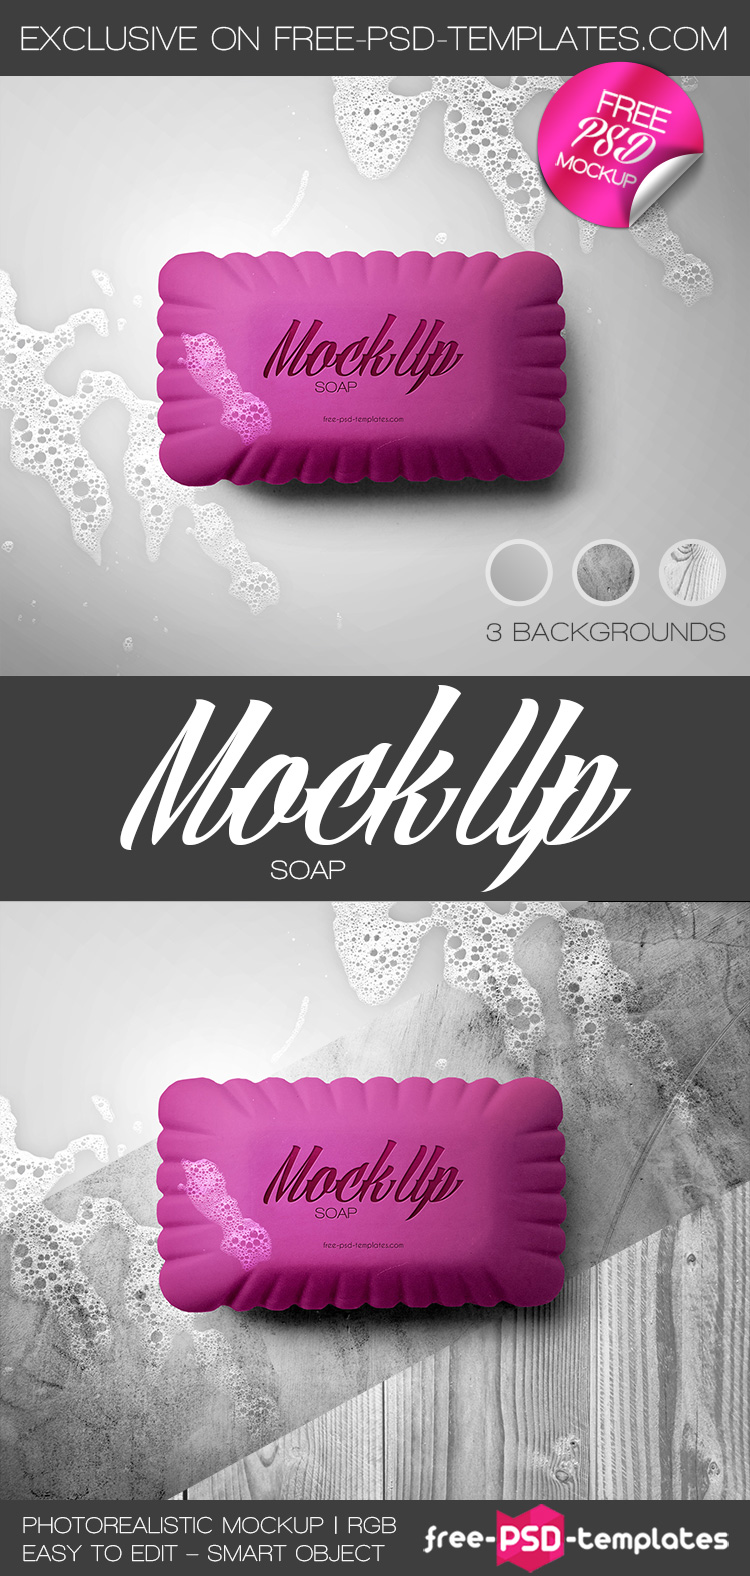 Download Free Soap Mockup For Designers - Responsive Joomla and ...